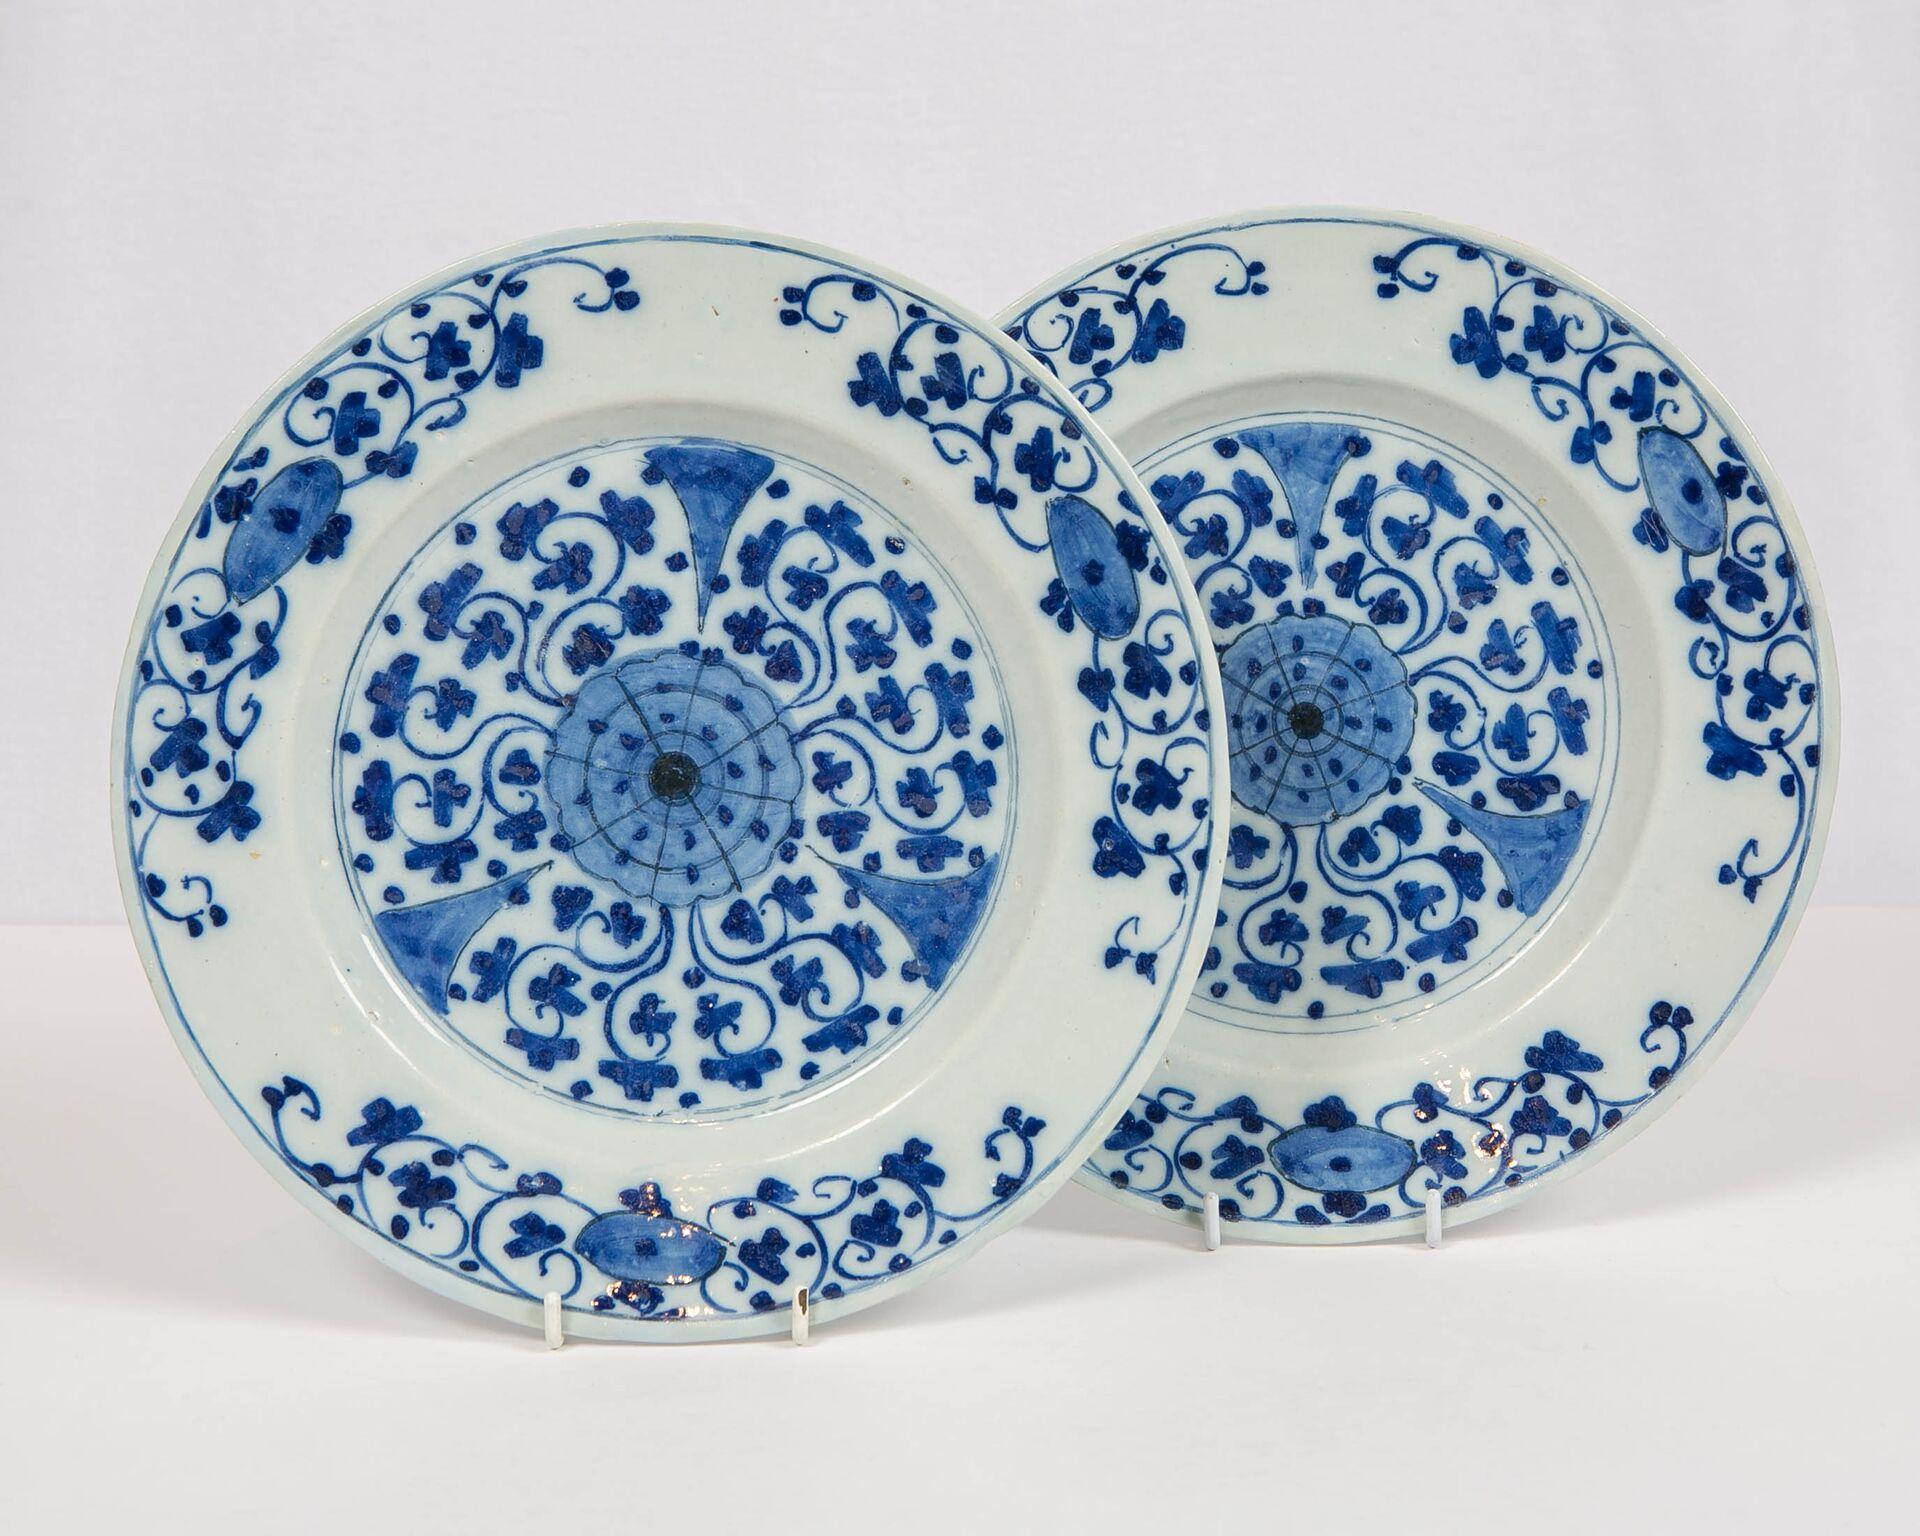 We are excited to offer this exquisite pair of Dutch Delft blue and white chargers made circa 1770. This plate features a beautifully symmetrical design showing delicate flowers and scrolling vines.
Dimensions: 10.5